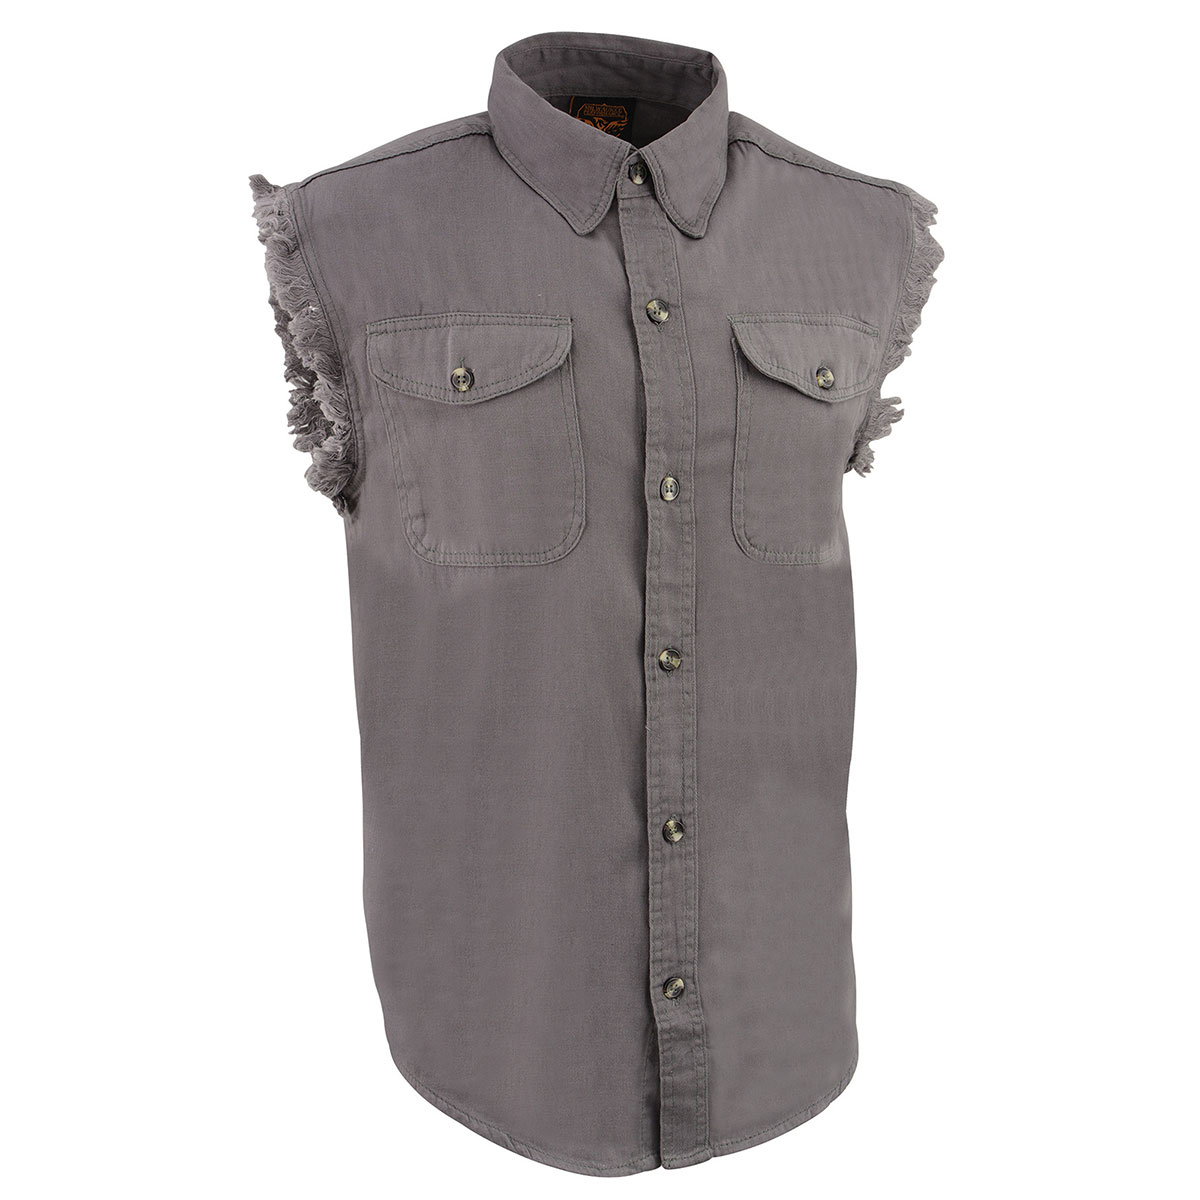 Milwaukee Leather DM4004 Men's Grey Lightweight Denim Shirt with with Frayed Cut Off Sleeveless Look 4X-Large - image 1 of 5